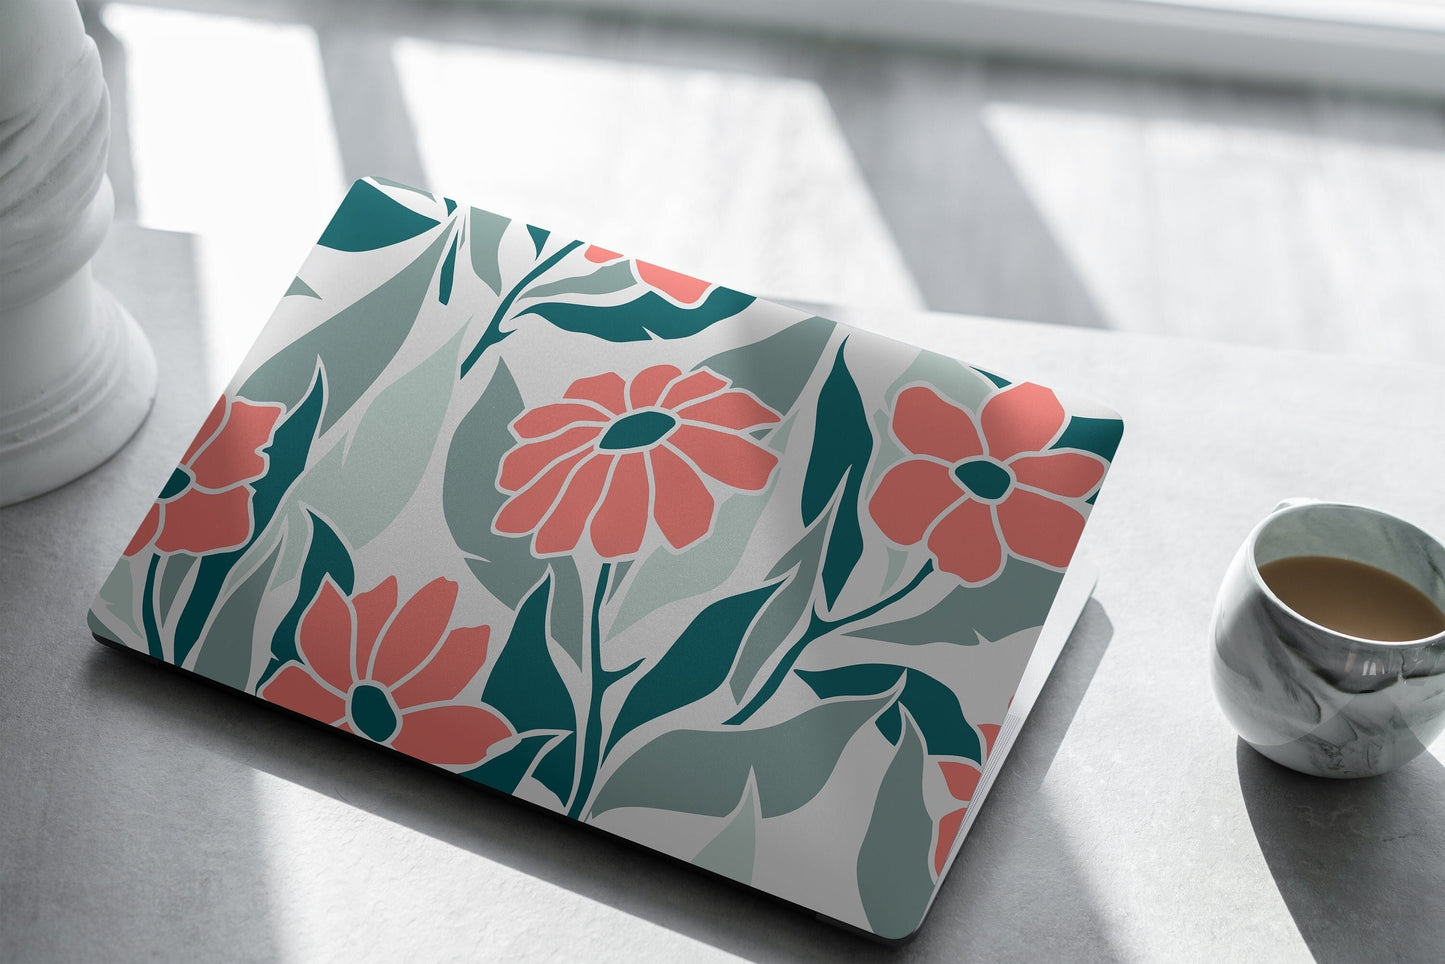 Abstract Floral Laptop Skin, Laptop Cover, Laptop Skins, Removable Laptop Skins, Laptop Decal, Customized Laptop Full Coverage Stickers, 389 - James & Inks